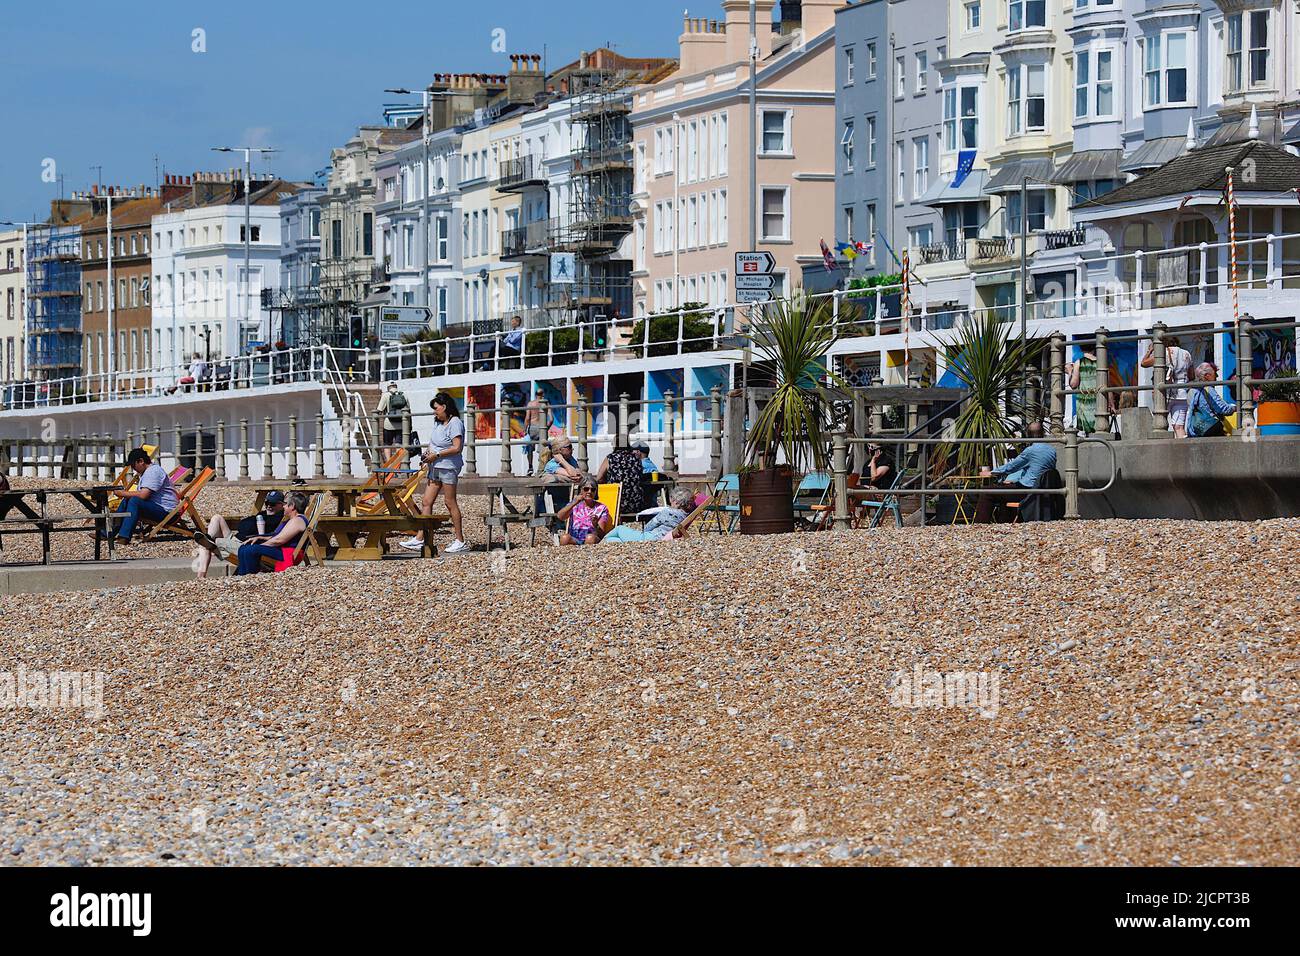 Hastings, East Sussex, UK. 15 Jun, 2022. UK Weather: Hot and sunny at the seaside town of Hastings in East Sussex as Brits enjoy the warm weather today along the seafront promenade. Busy beach cafe. Photo Credit: Paul Lawrenson /Alamy Live News Stock Photo